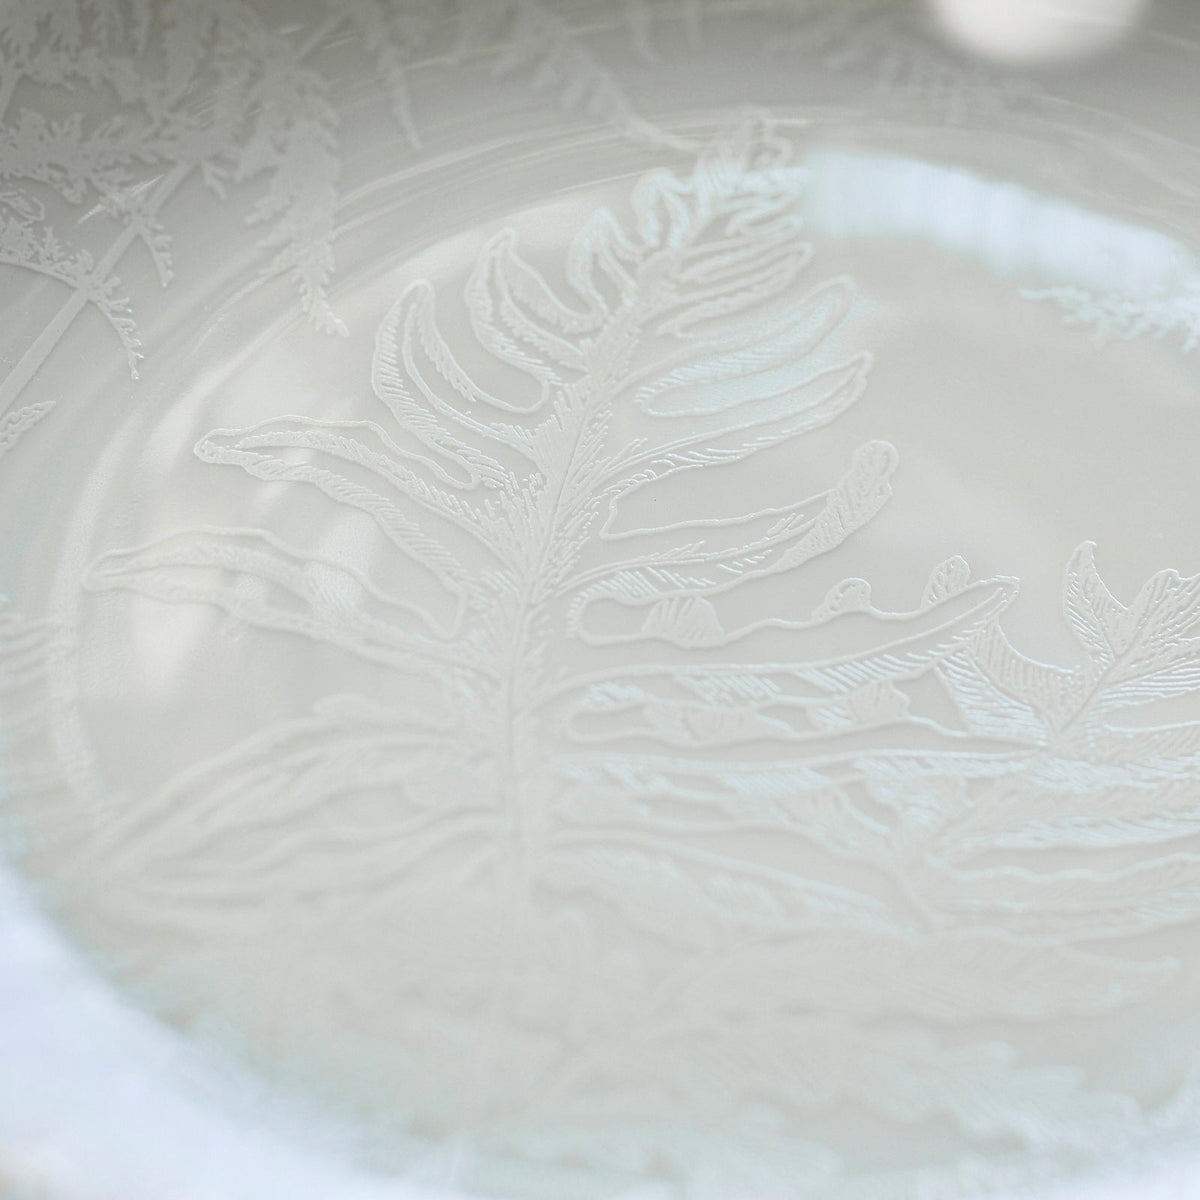 A Spring Coupe Platter by Caskata with a spring pattern on it.